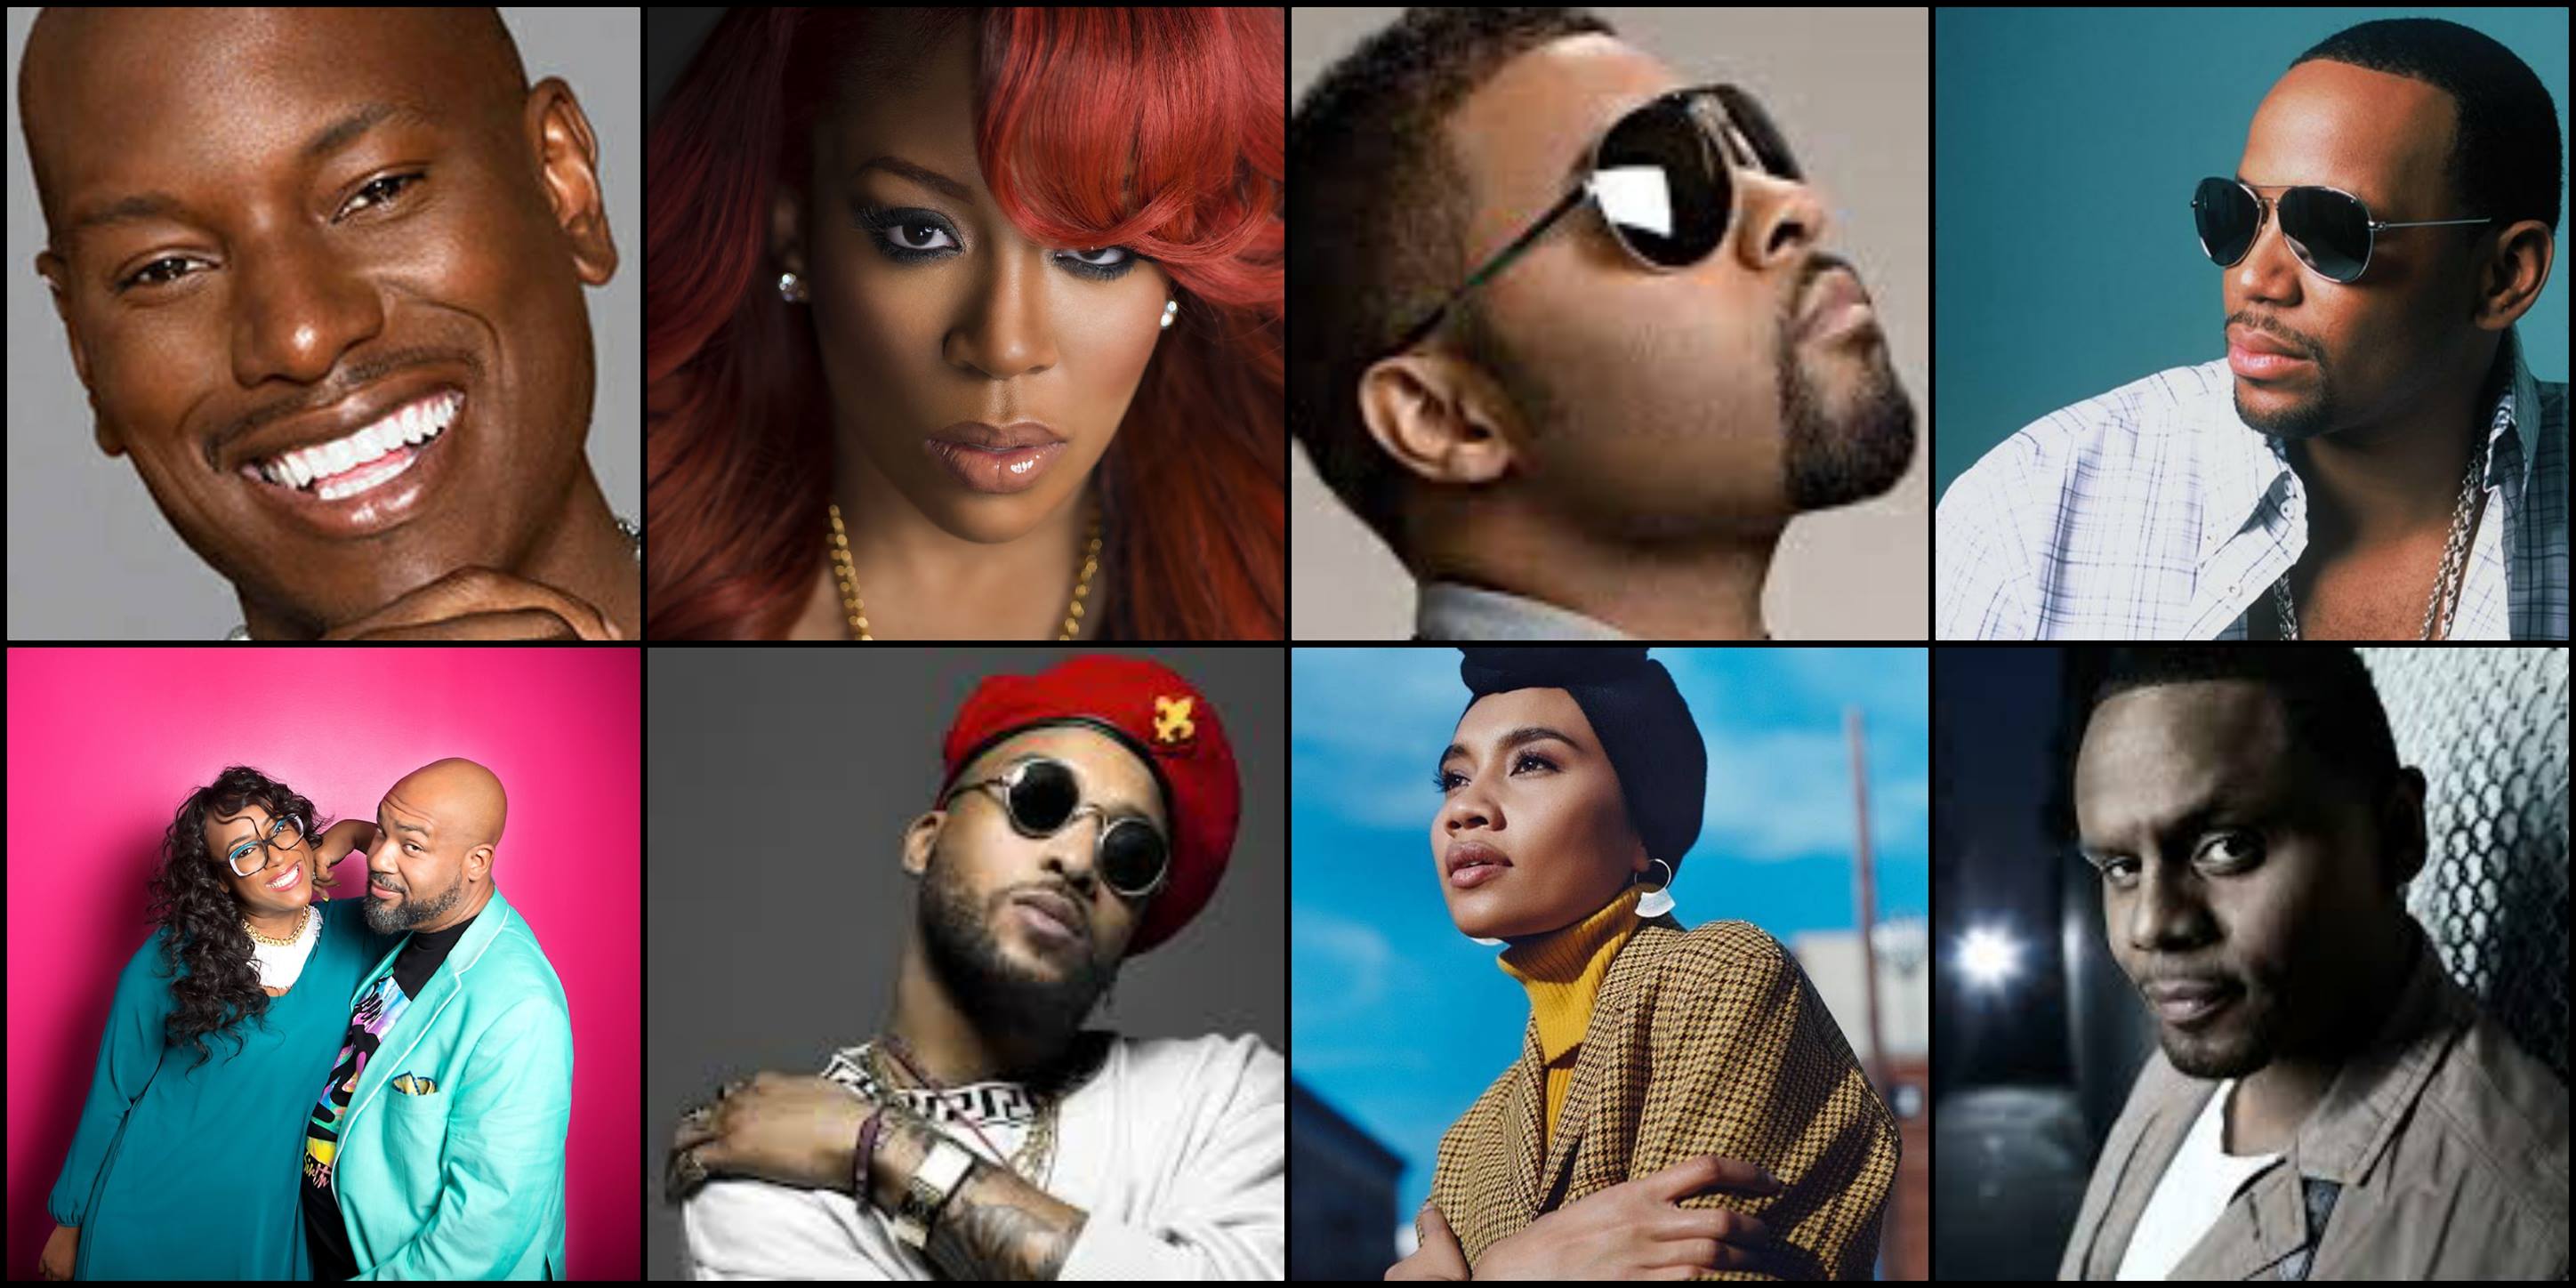 Tyrese, K.Michelle, MusiqSoulChild, Avant, Kindred the Family Soul, Ro James, Yuna, Carl Thomas & more LIVE at the Los Angeles Soul Music Festival 2017, July 14- 16.